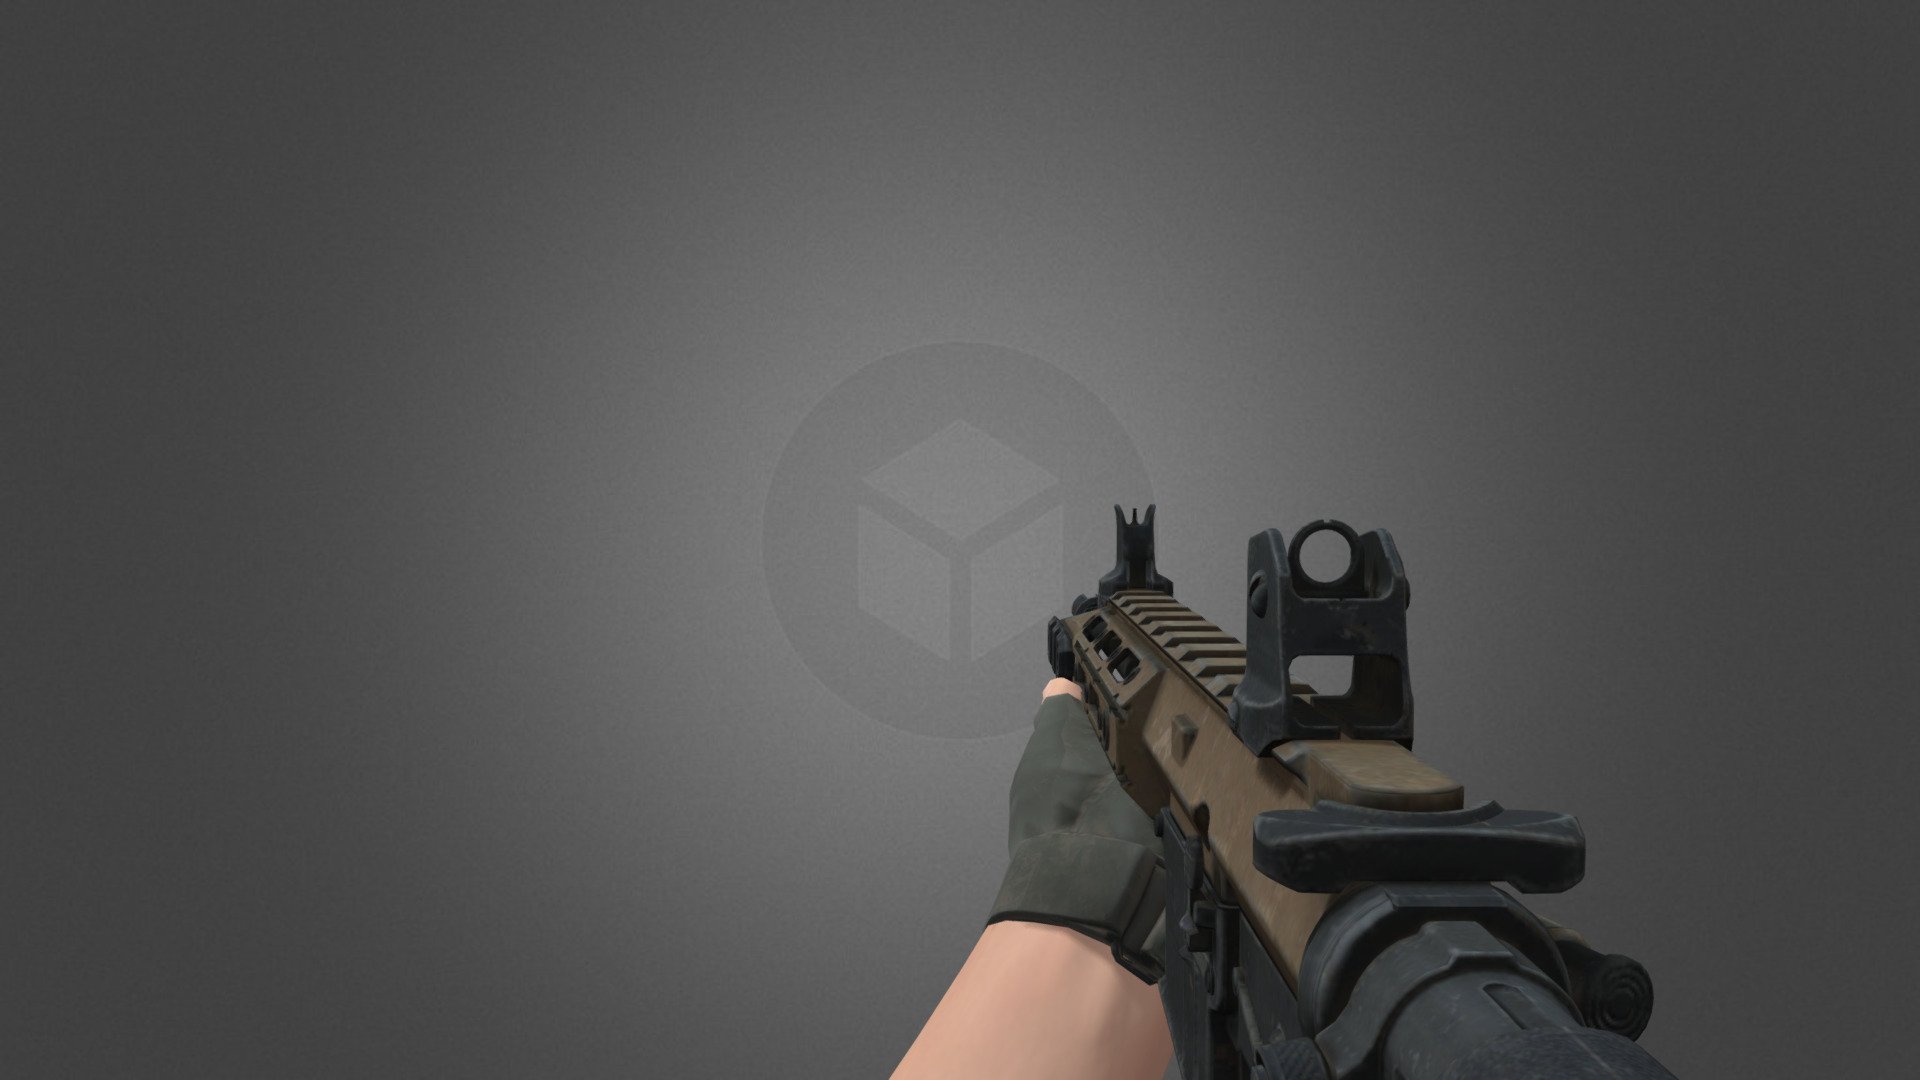 See also other models : https://sketchfab.com/barcodegames/models

Animations:

-Shoot

-Reload

-Draw

-Hide

For Game Engines - Remington R5 Animated - Buy Royalty Free 3D model by BarcodeGames 3d model